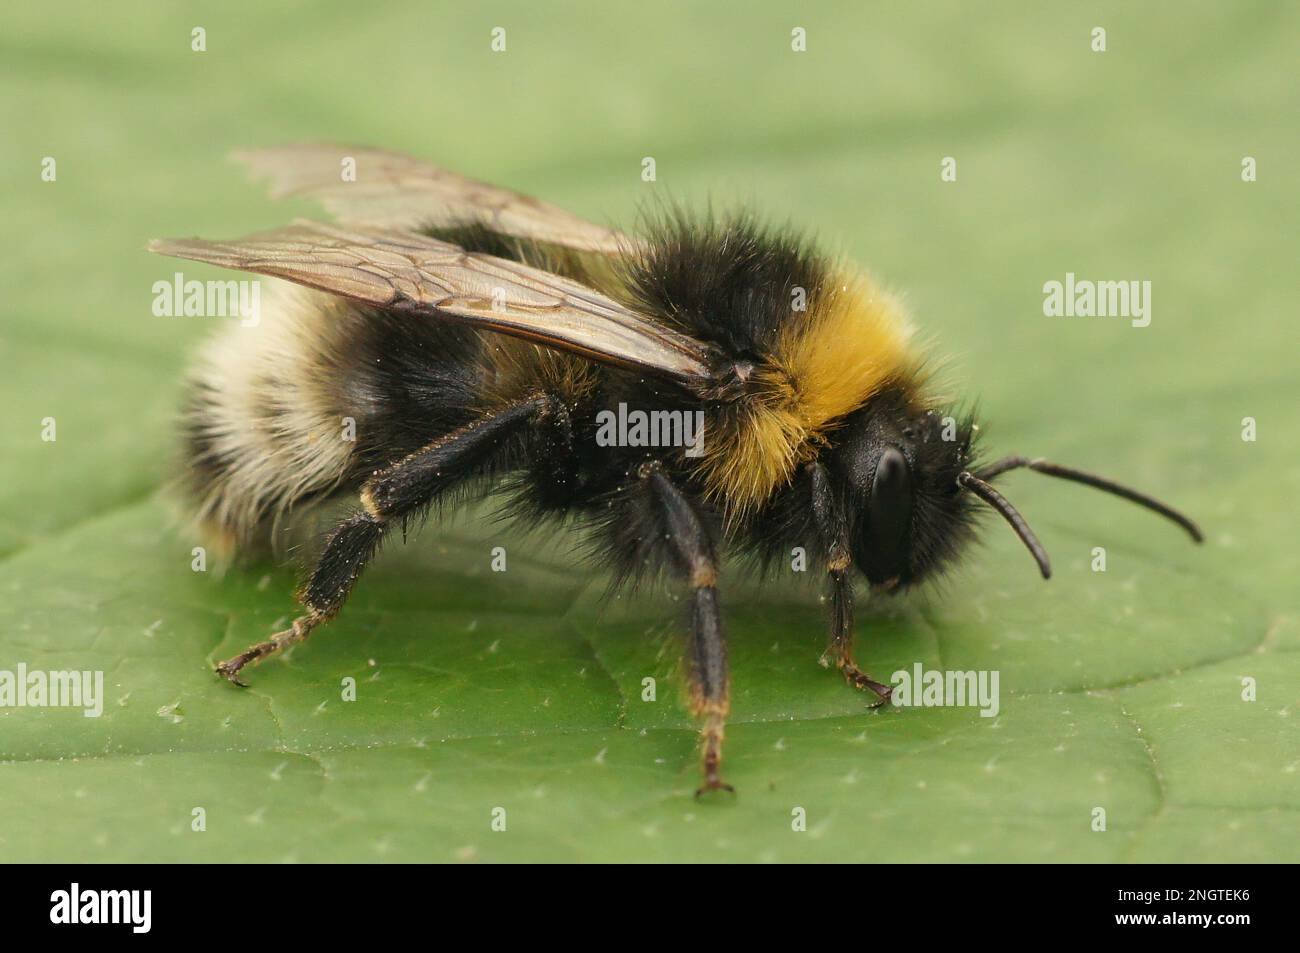 Natural closeup on the forest four colored cuckoo-bumblebee, Bombus sylvestris on a green leaf in the garden Stock Photo